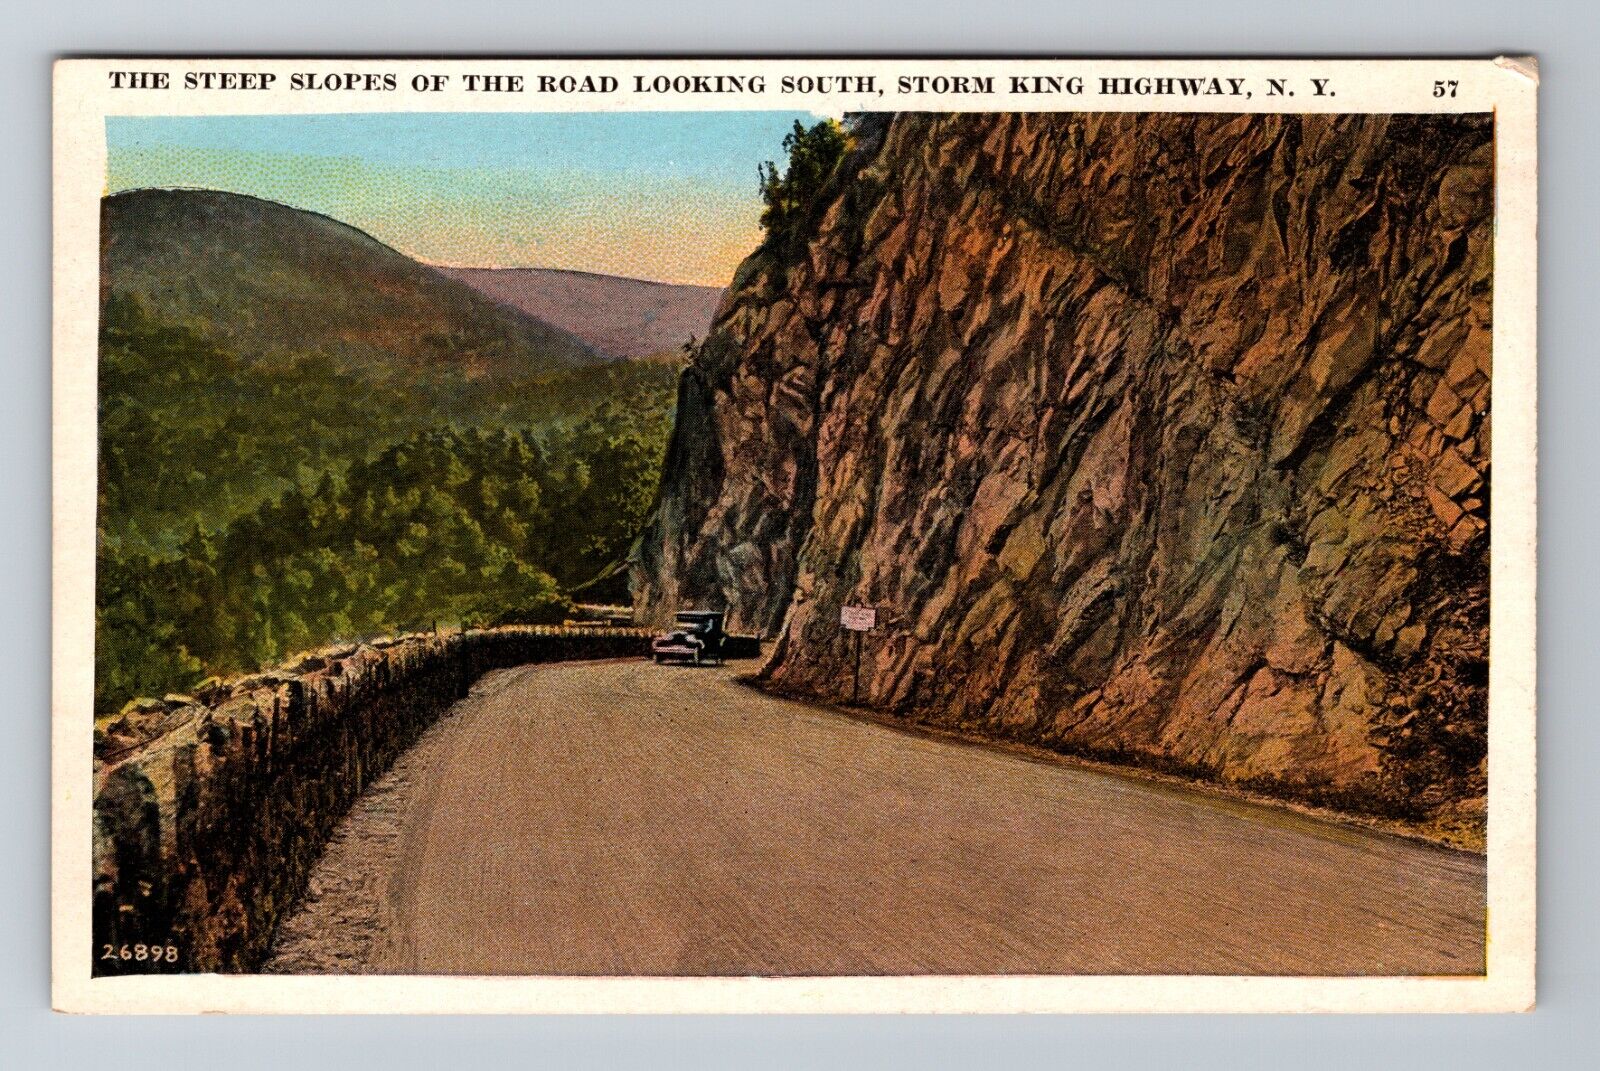 NY-New York, Scenic View Mountain Storm King Highway Period Car Vintage Postcard